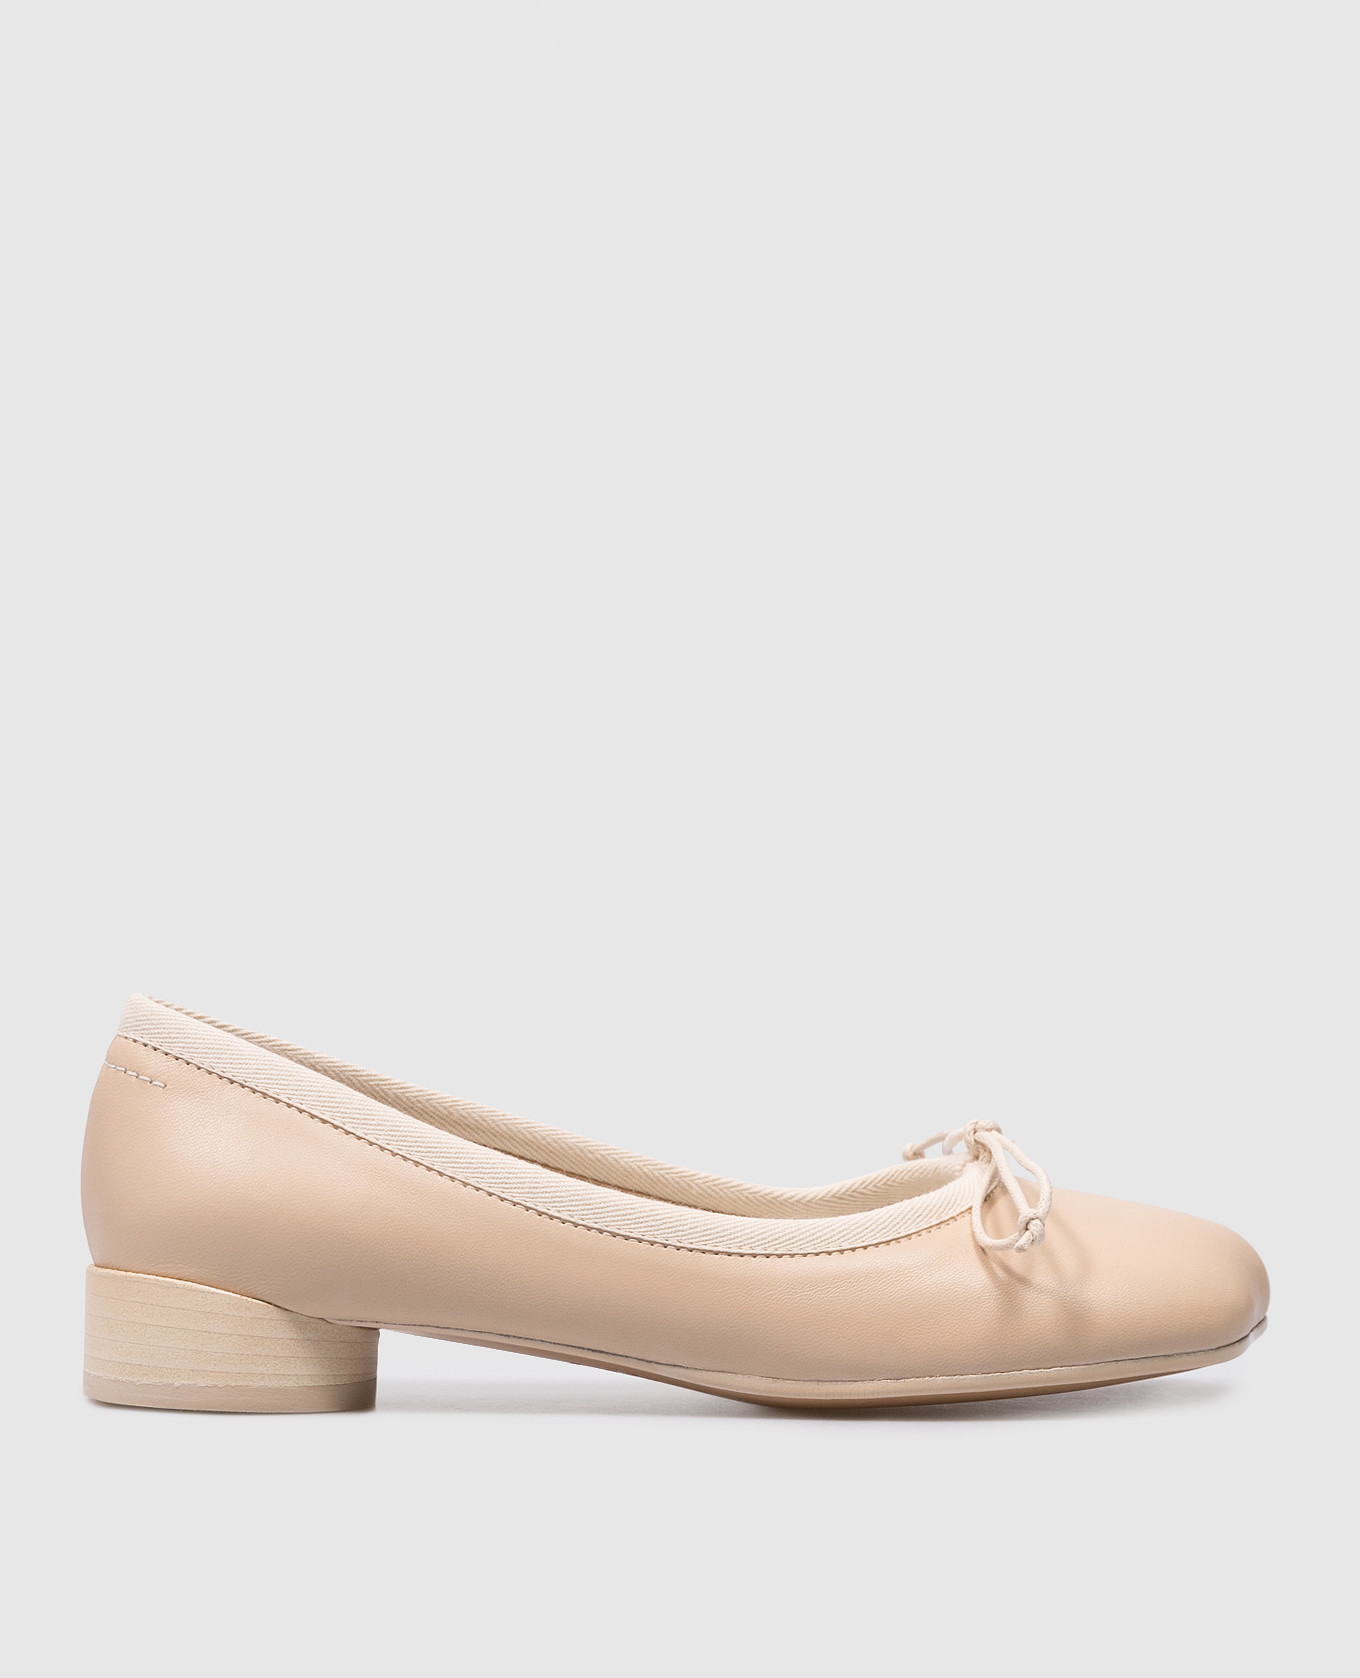 Beige leather ballet flats with a bow